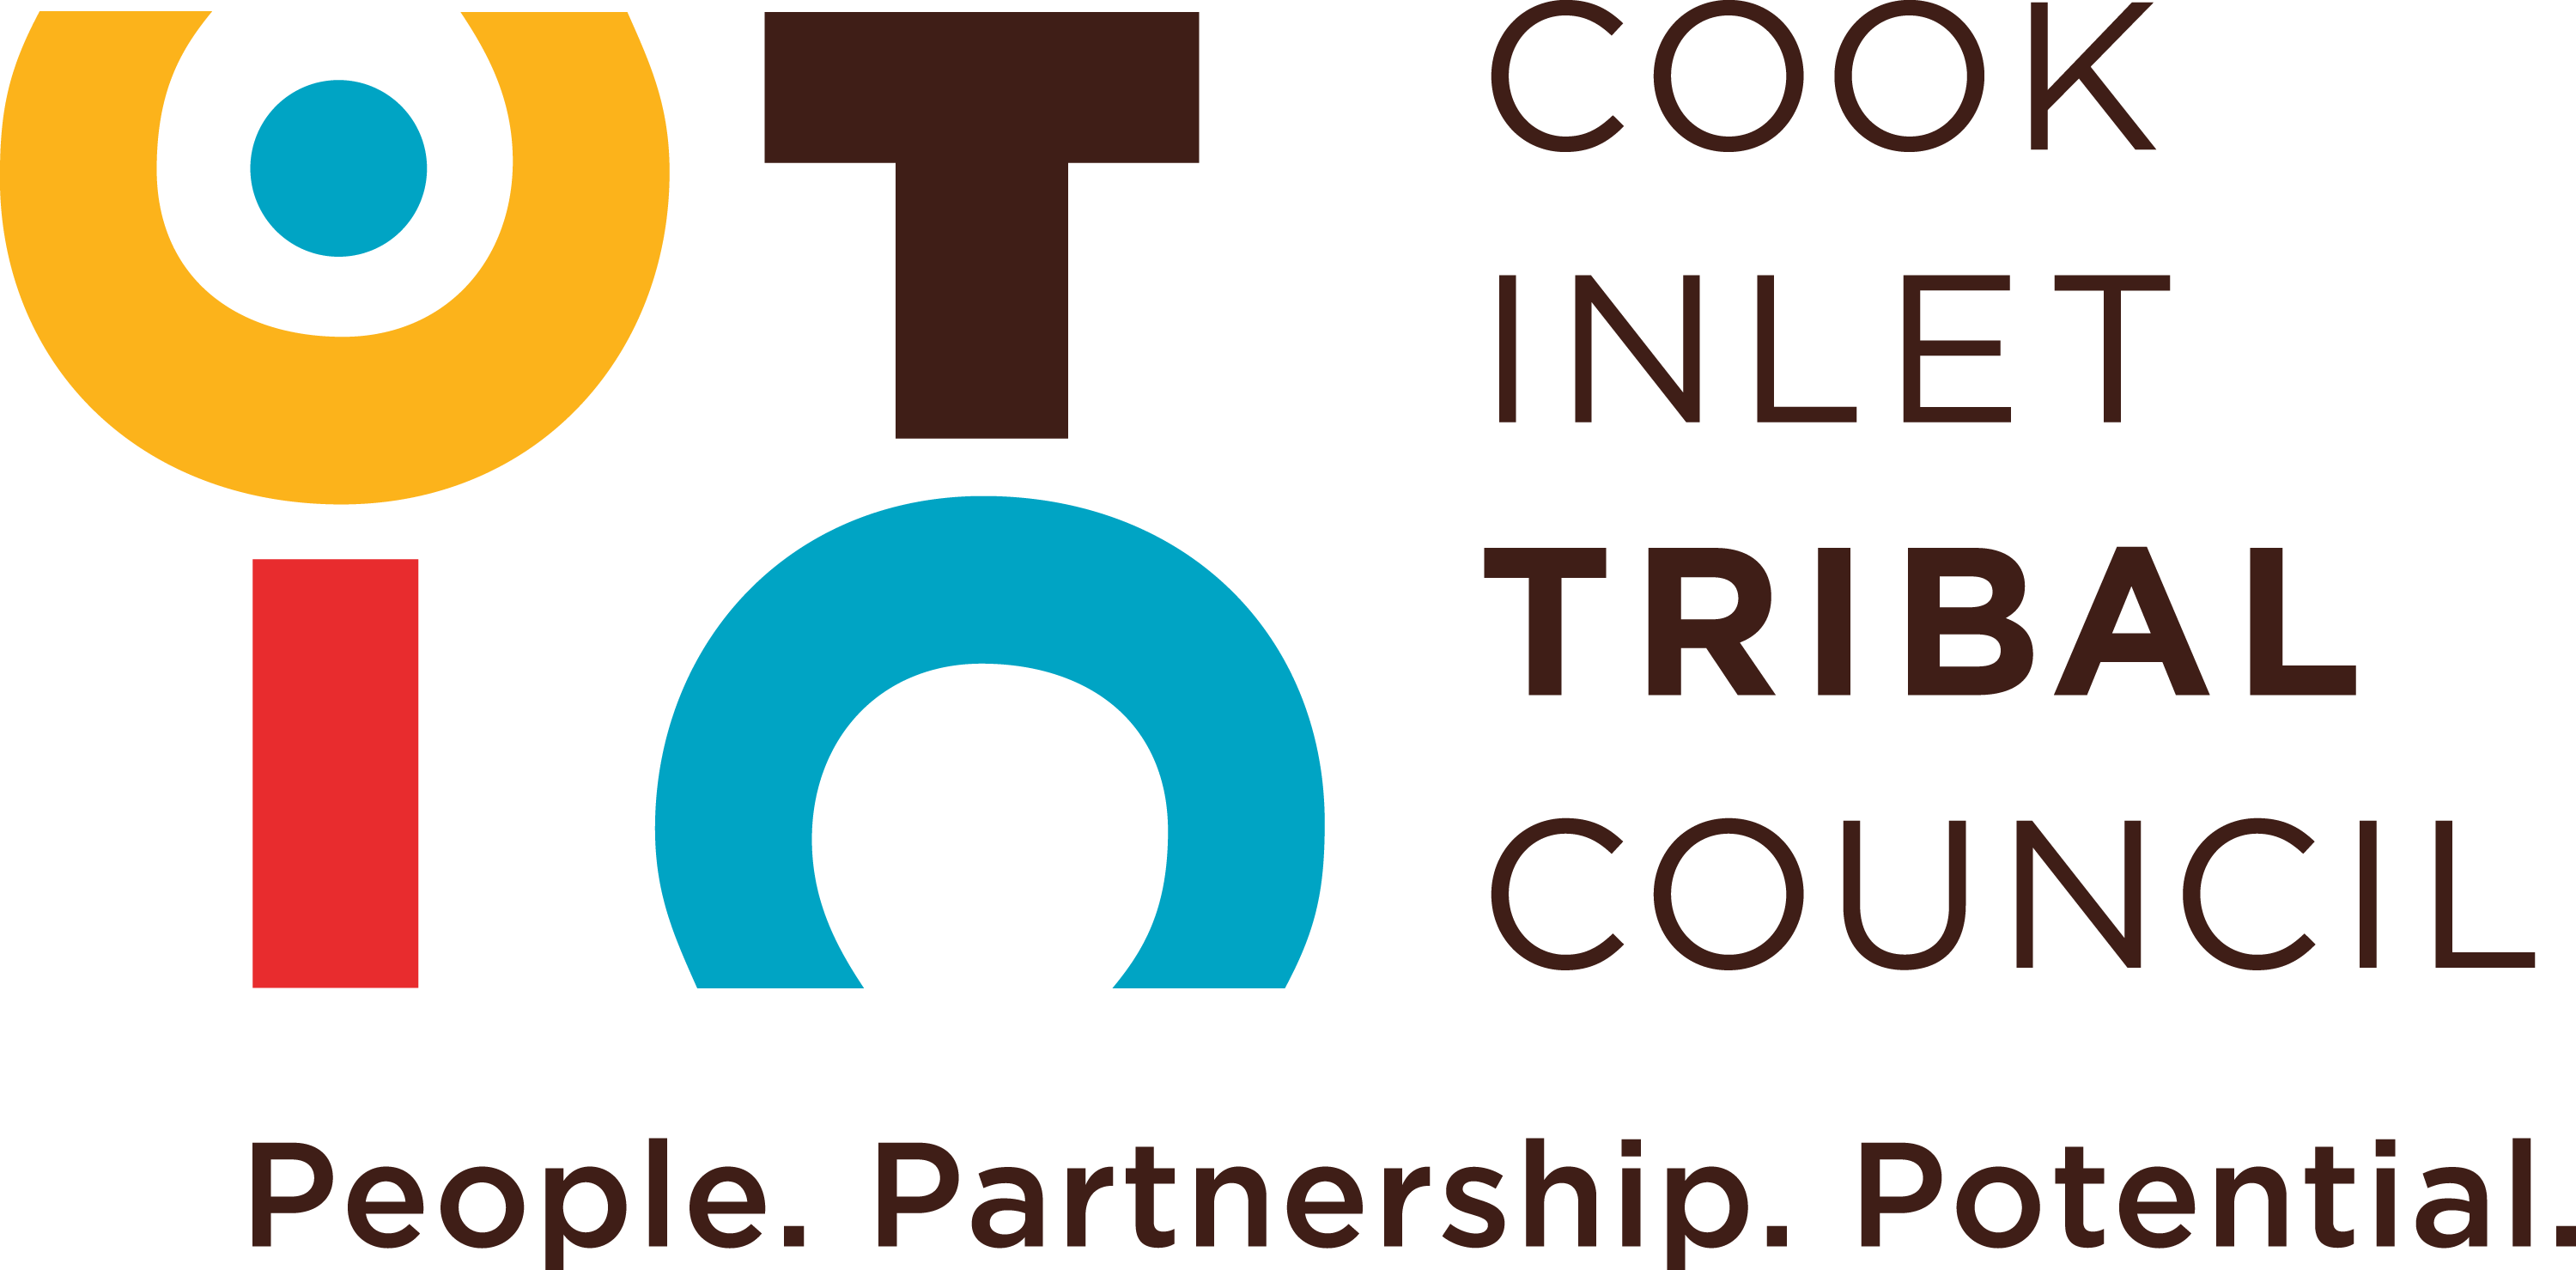 Cook Inlet Tribal Council